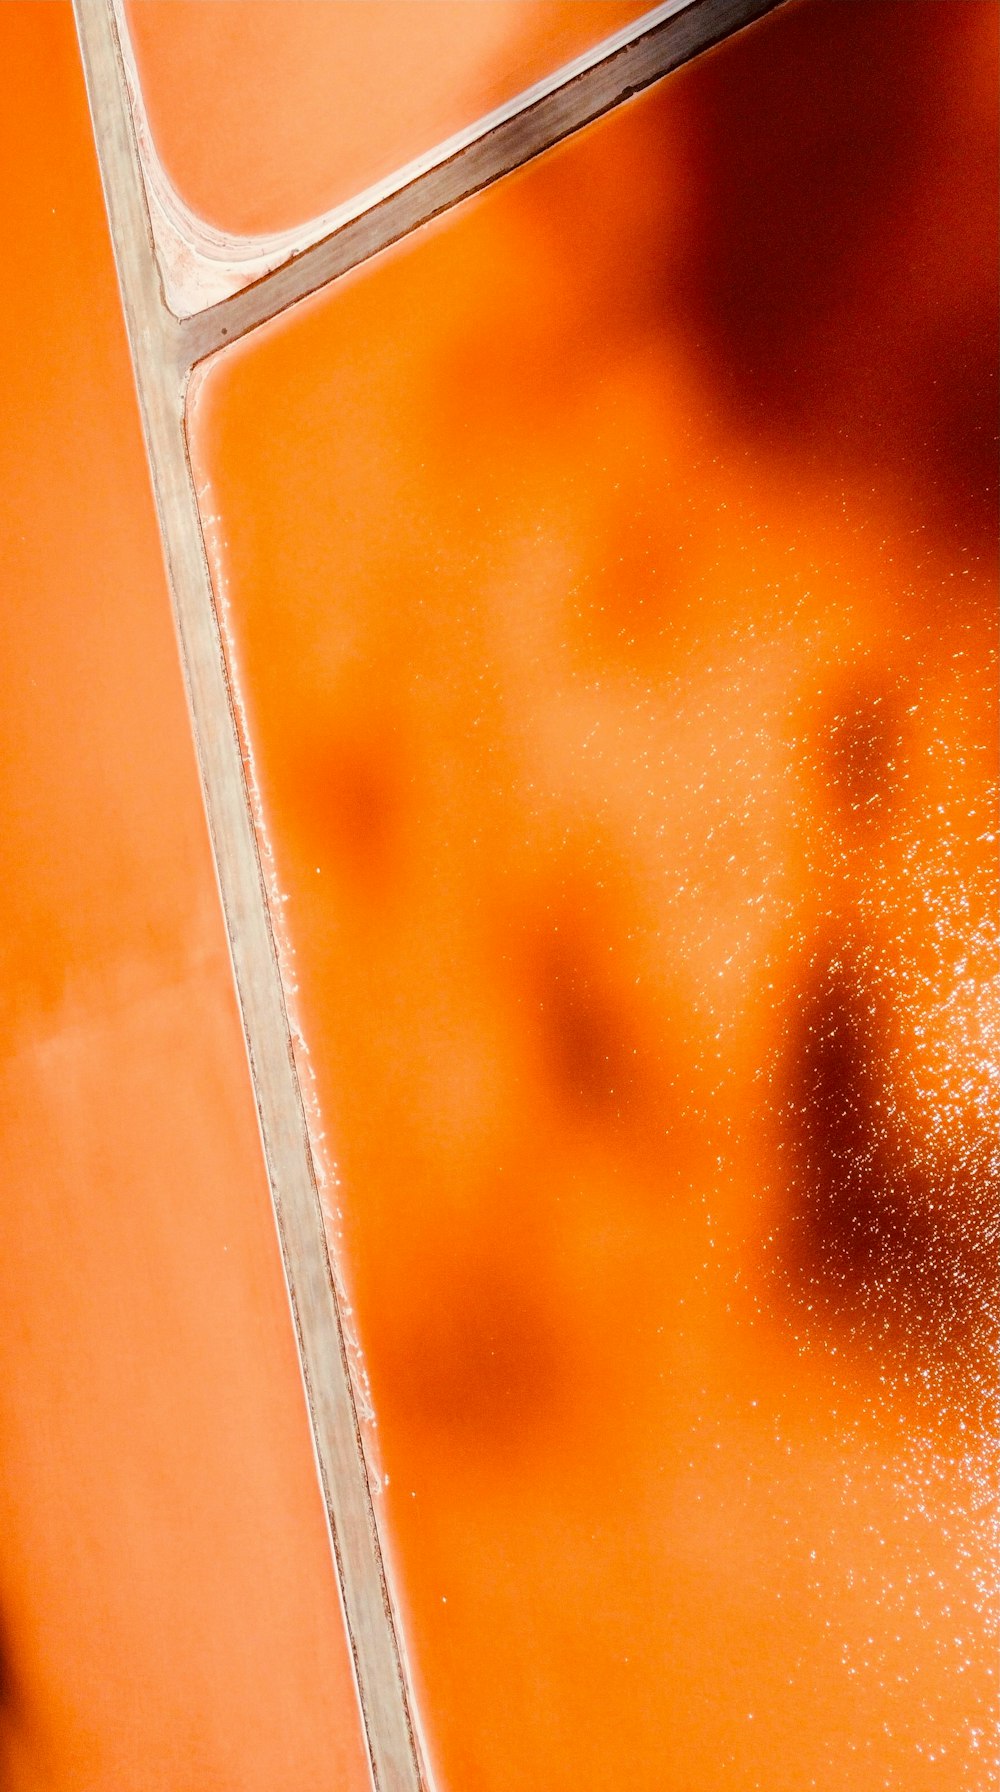 a close up of a red and orange liquid